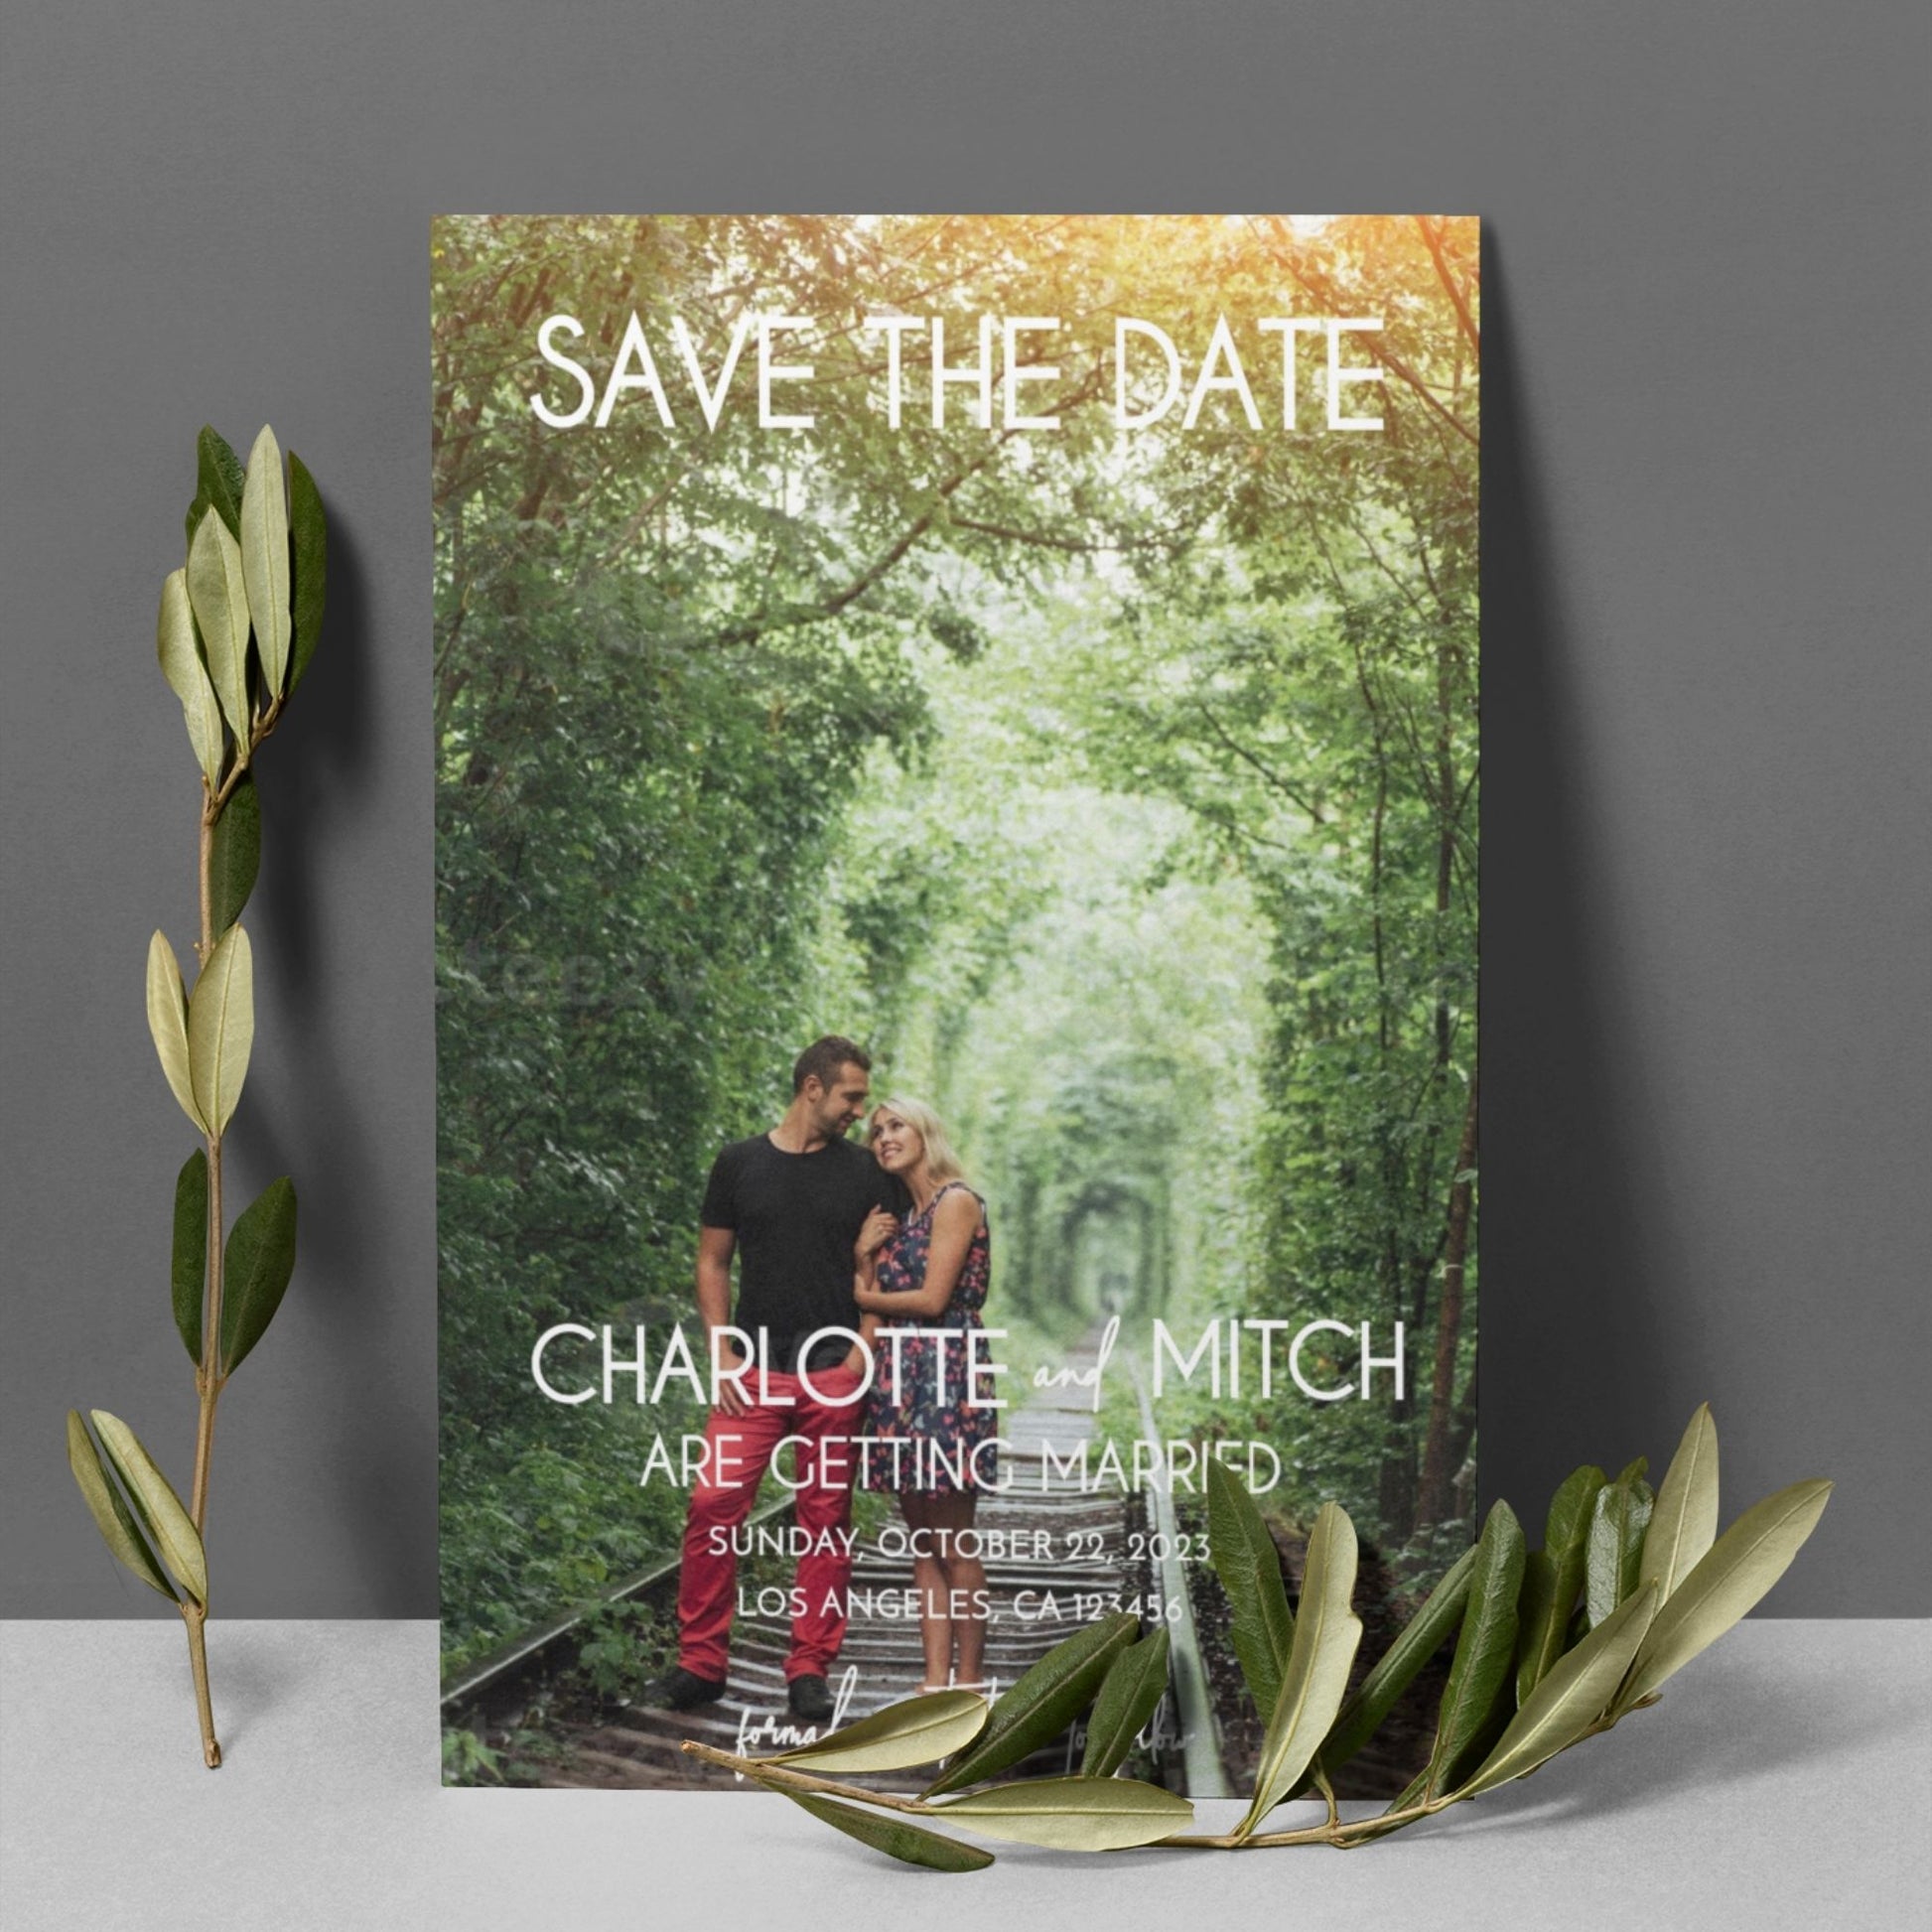 Customized Save the Date Invitation Template